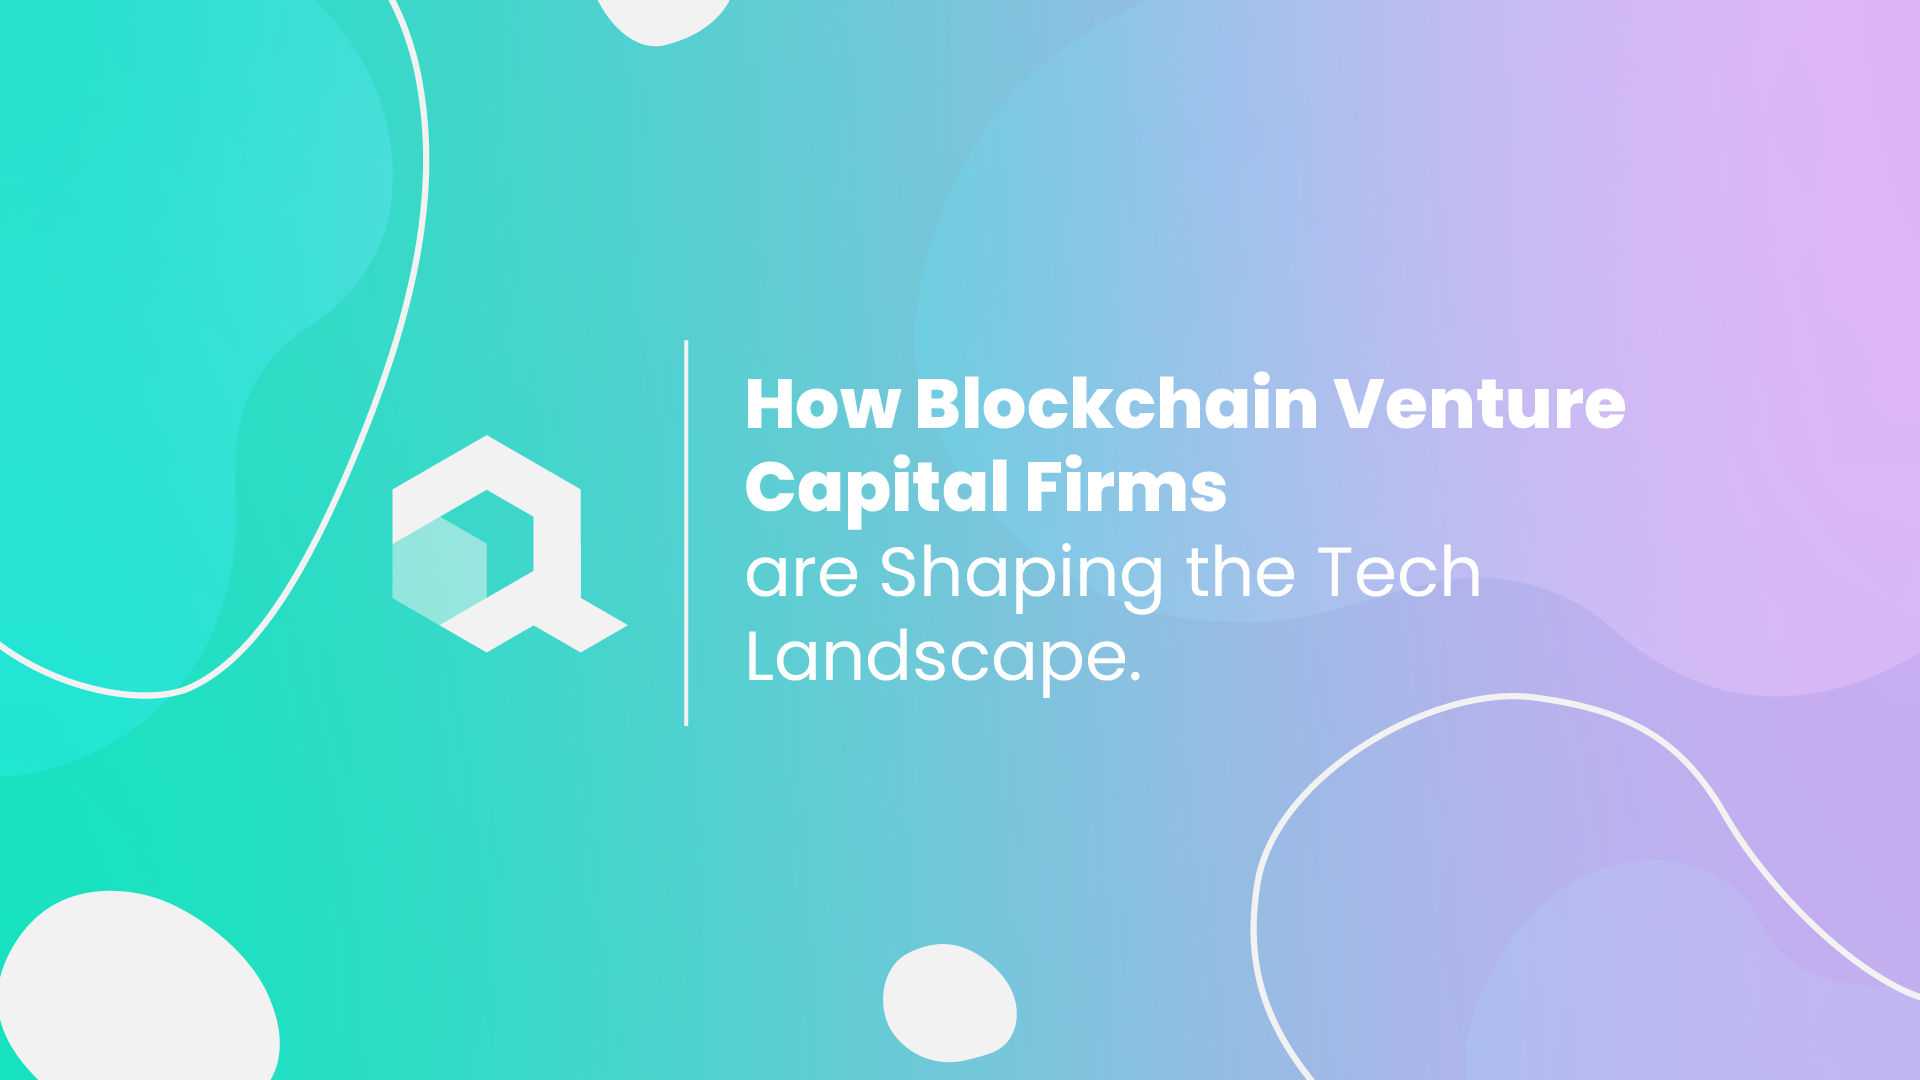 How Blockchain Venture Capital Firms are Shaping the Tech Landscape